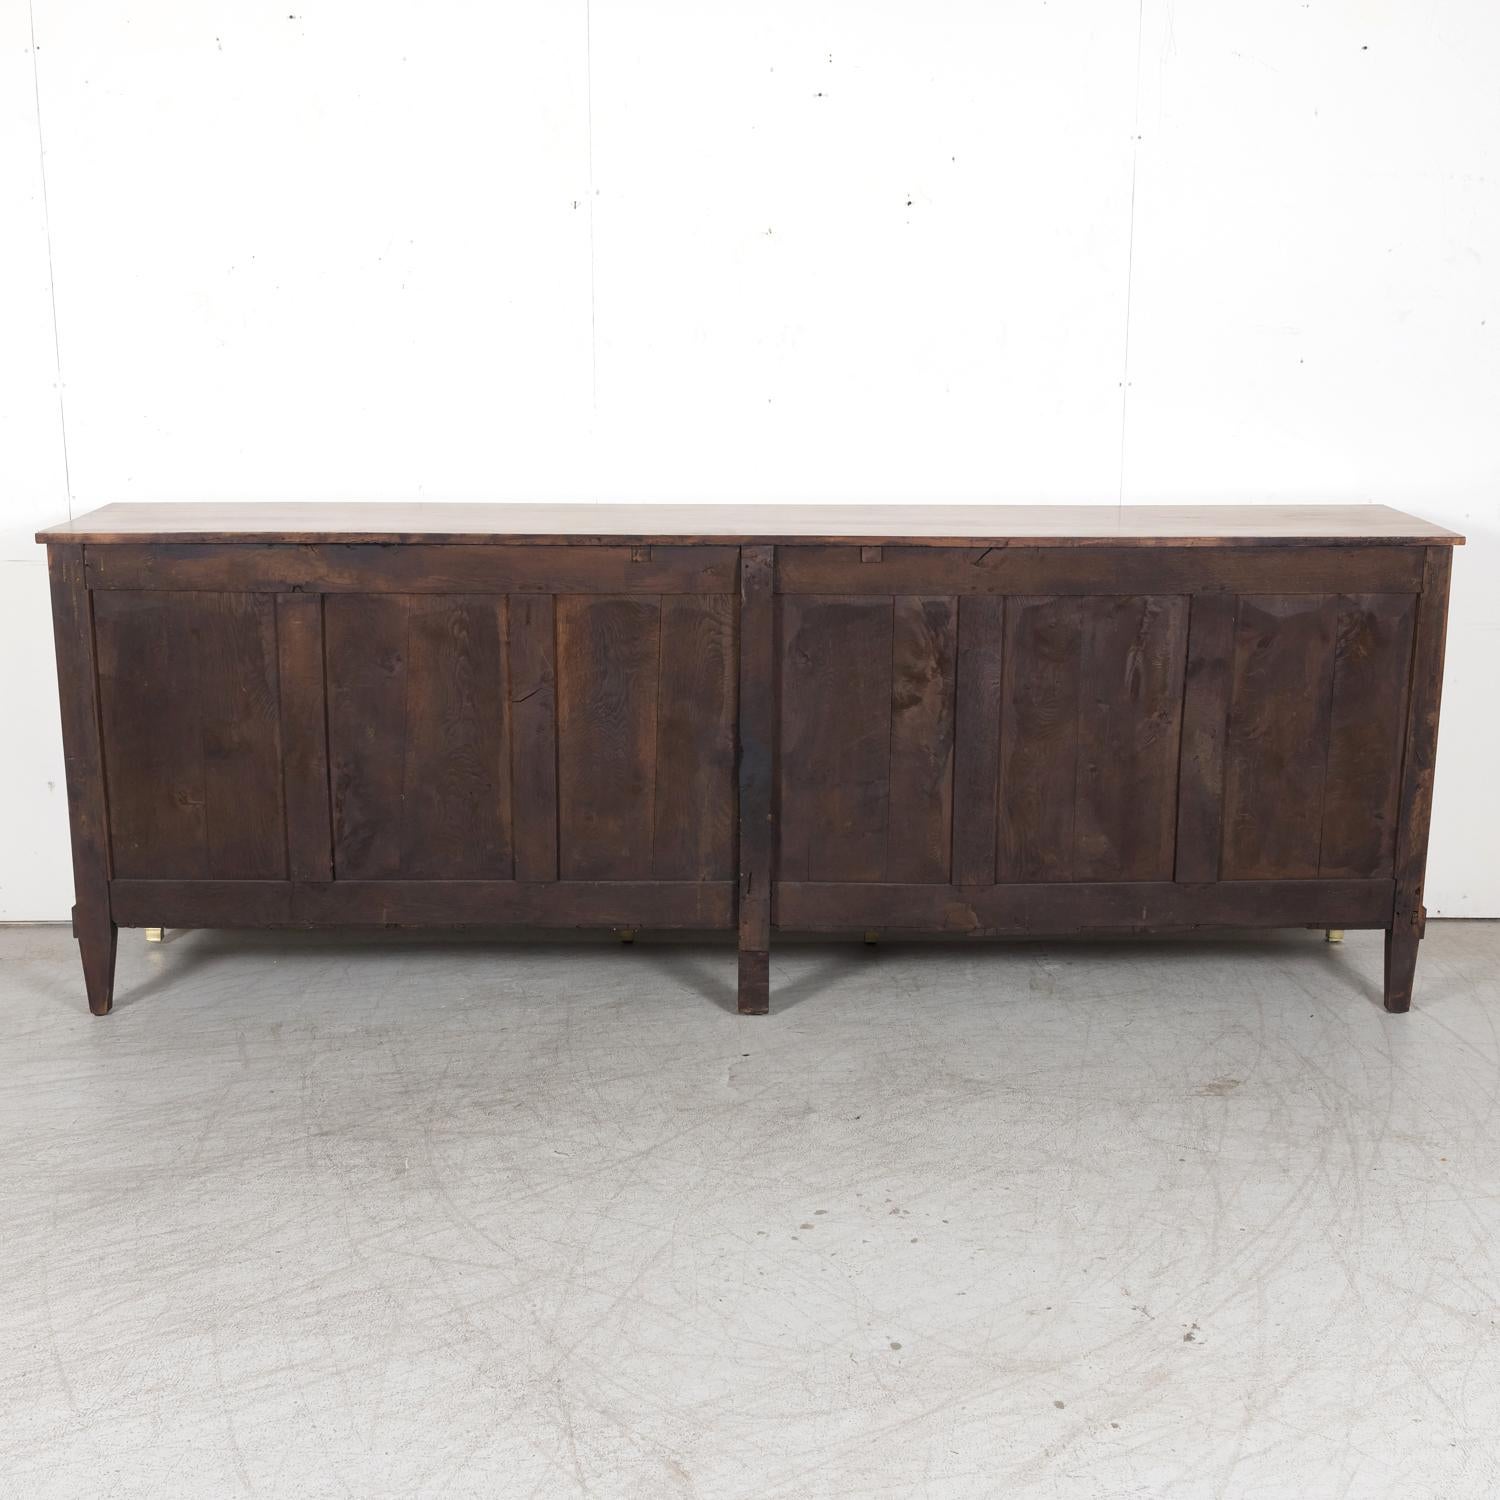  19th Century French Louis XVI Style Cherry Enfilade Buffet with Fruitwood Inlay 16